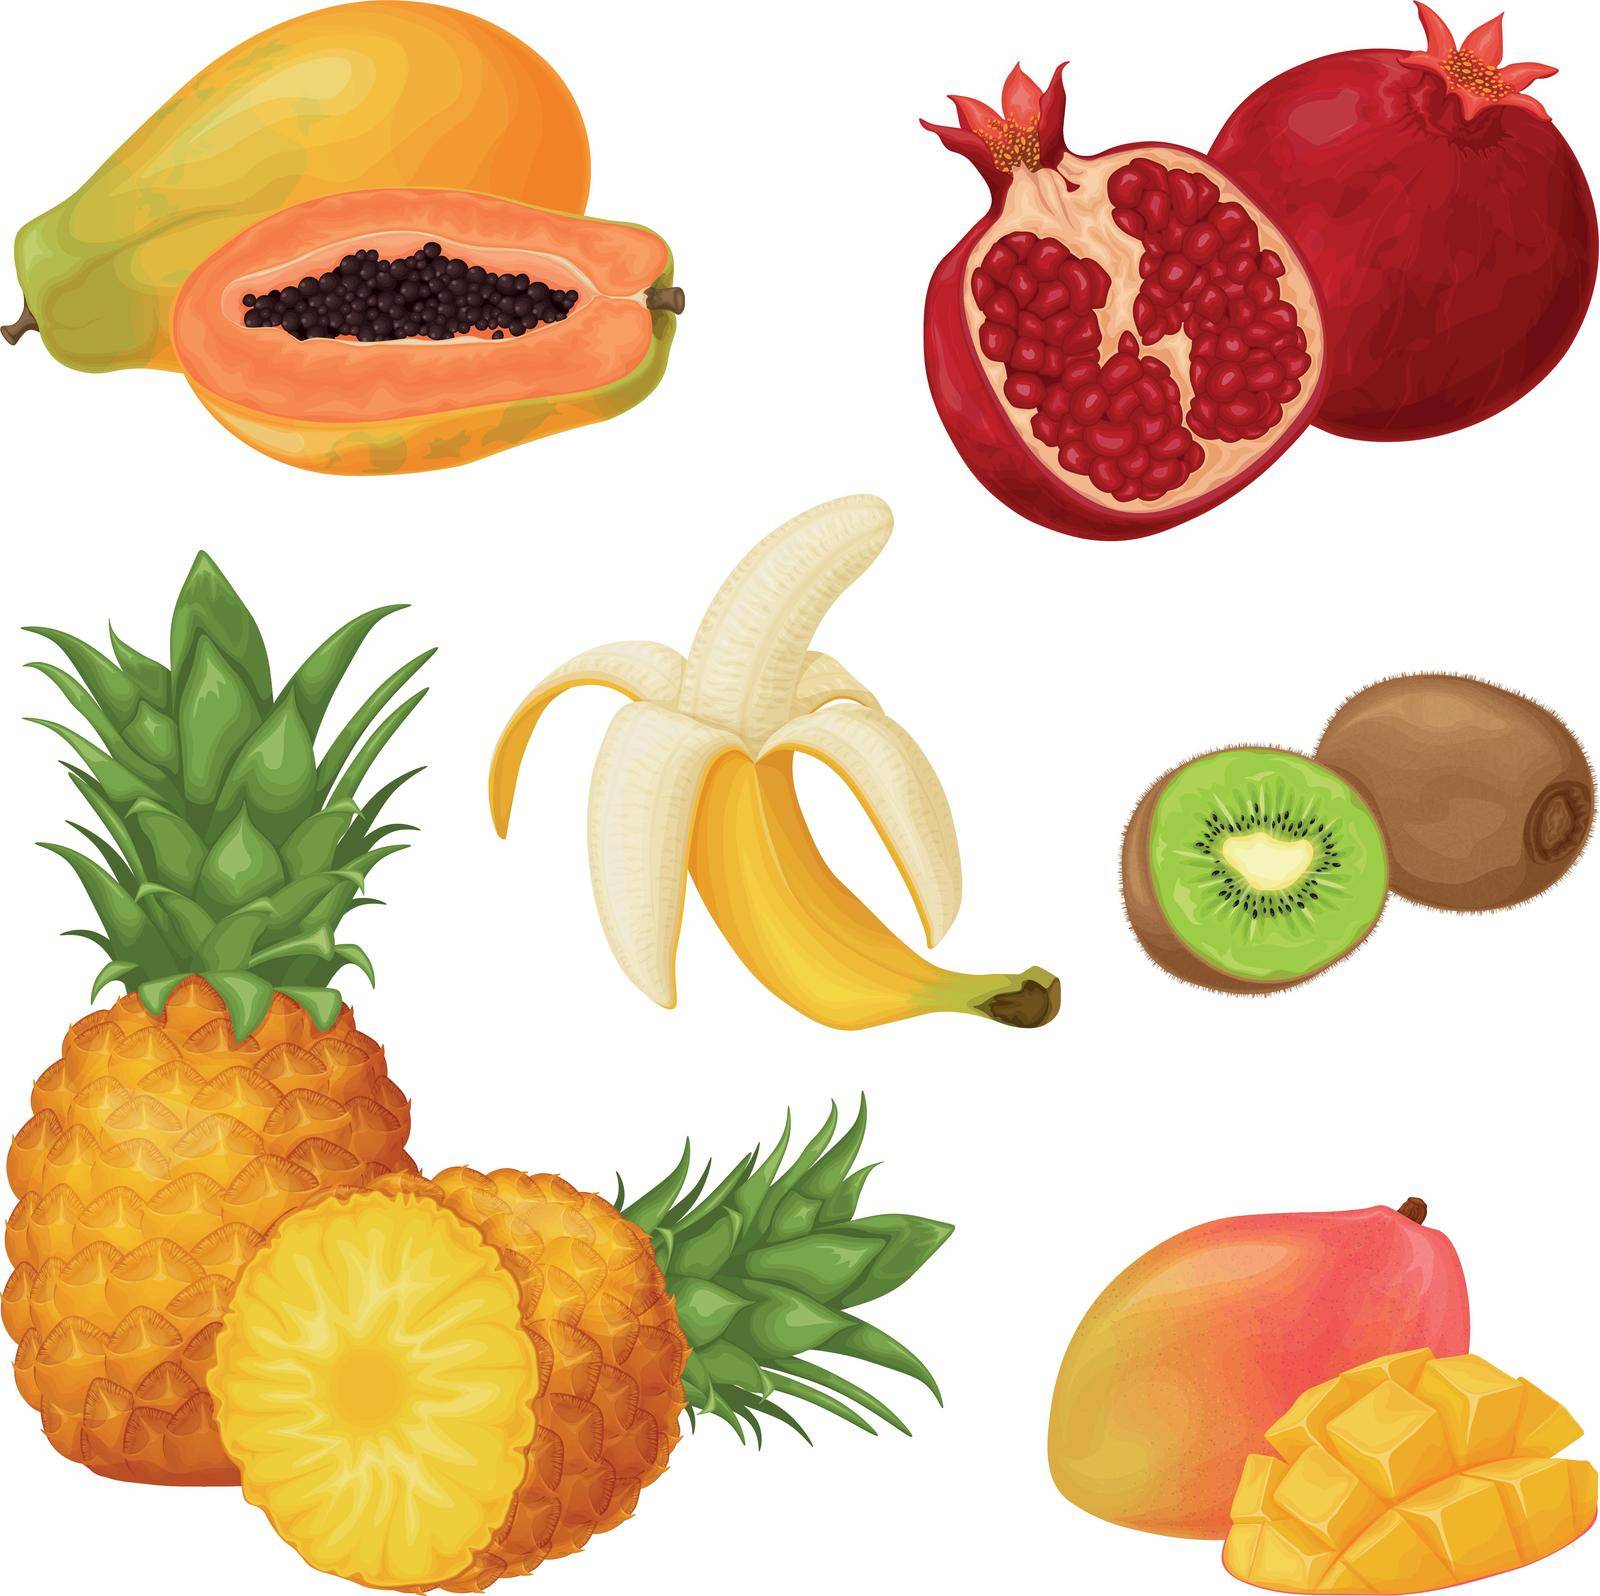 Tropical fruit set. A collection of tropical fruits such as papaya, pomegranate, banana and pineapple, kiwi and mango. Vector illustration.